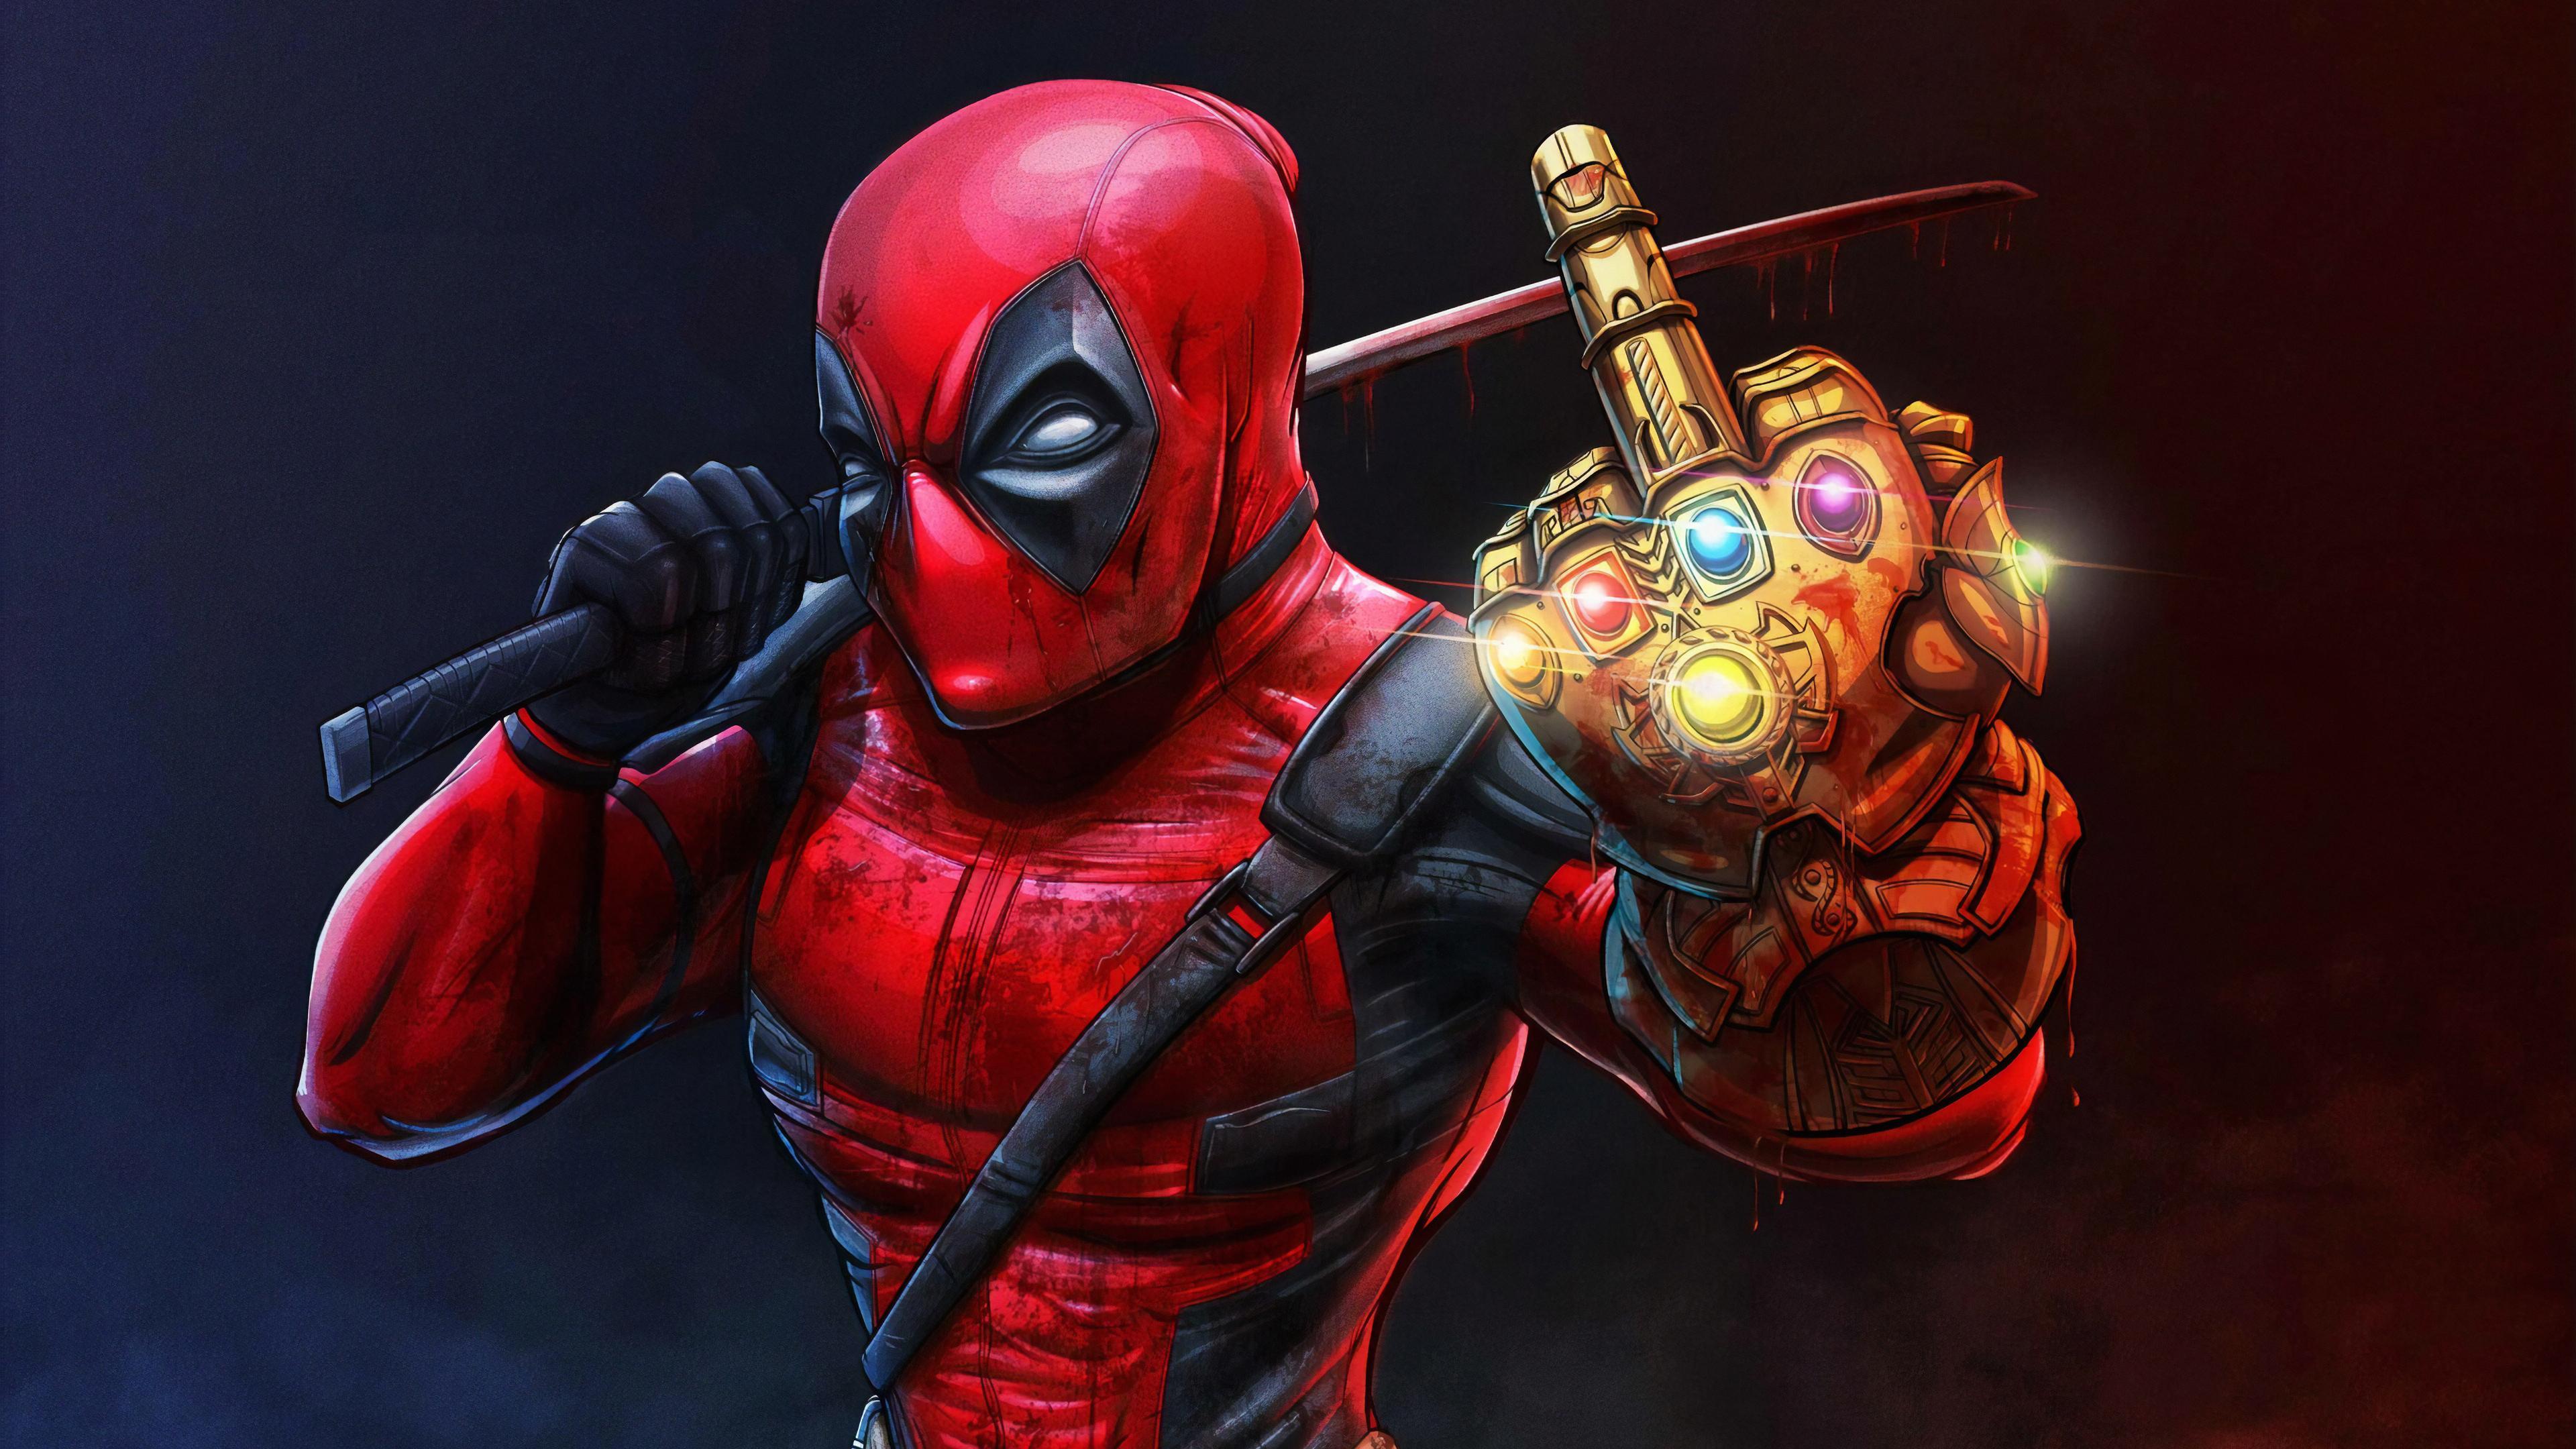 Wallpapers 4k Deadpool With Thanos Infinity Gauntlet 4k